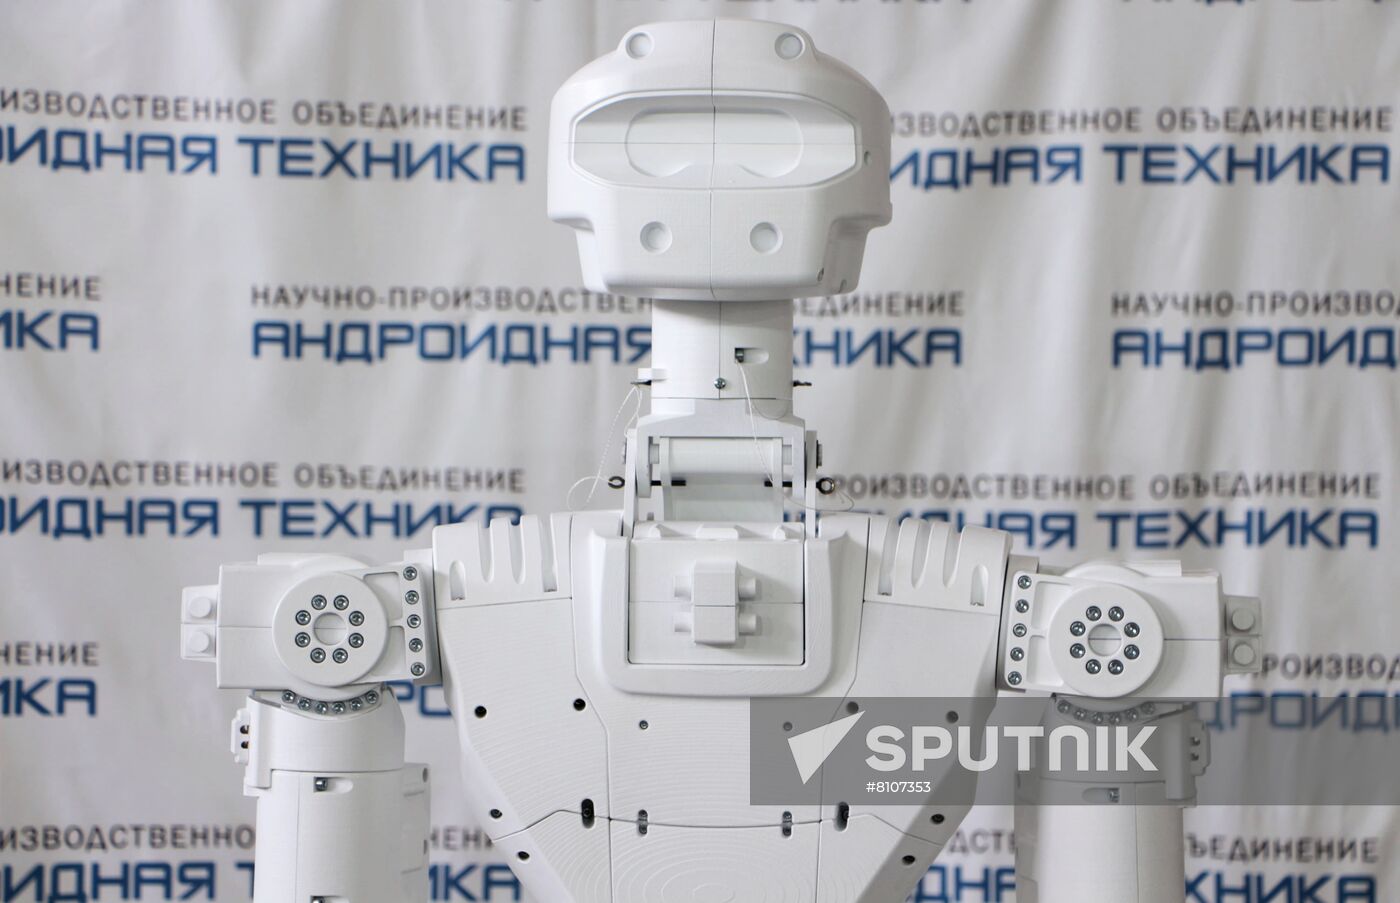 Russia Space Robot